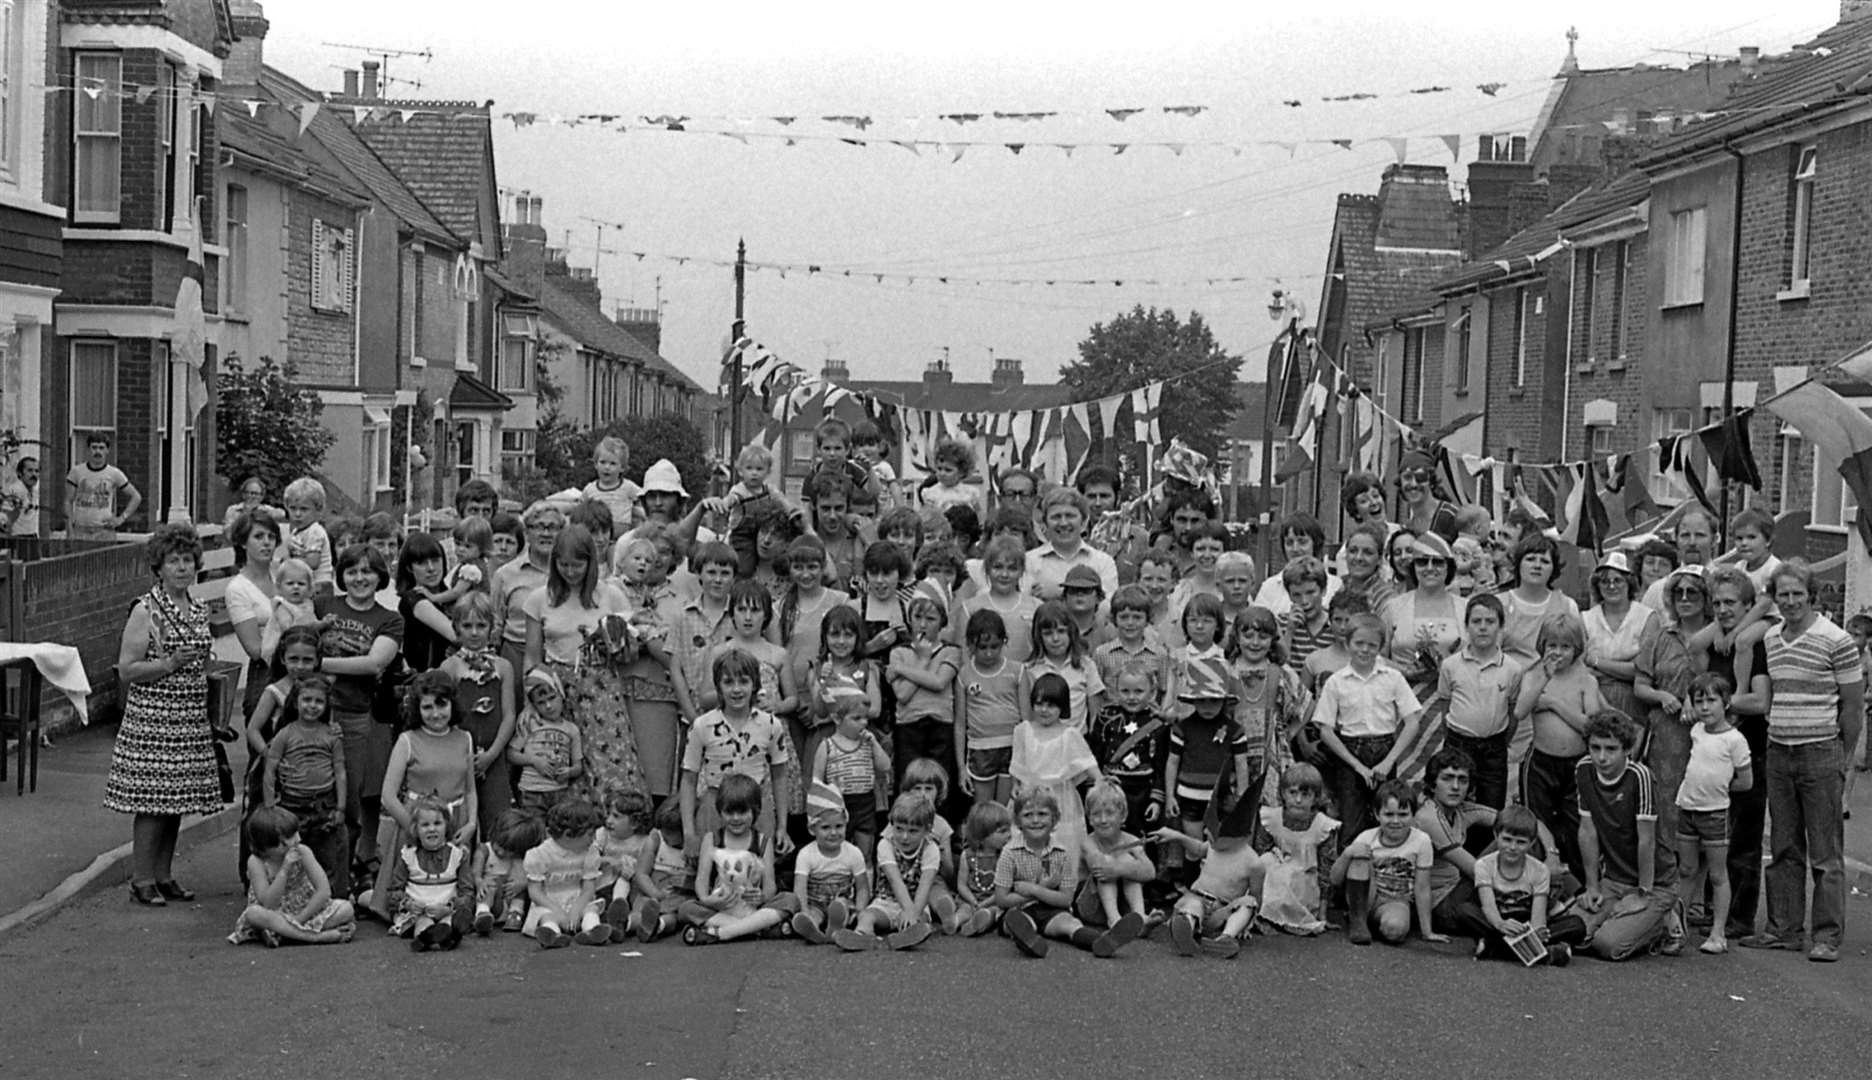 Residents gathered in 1981 for a street party in Maidstone